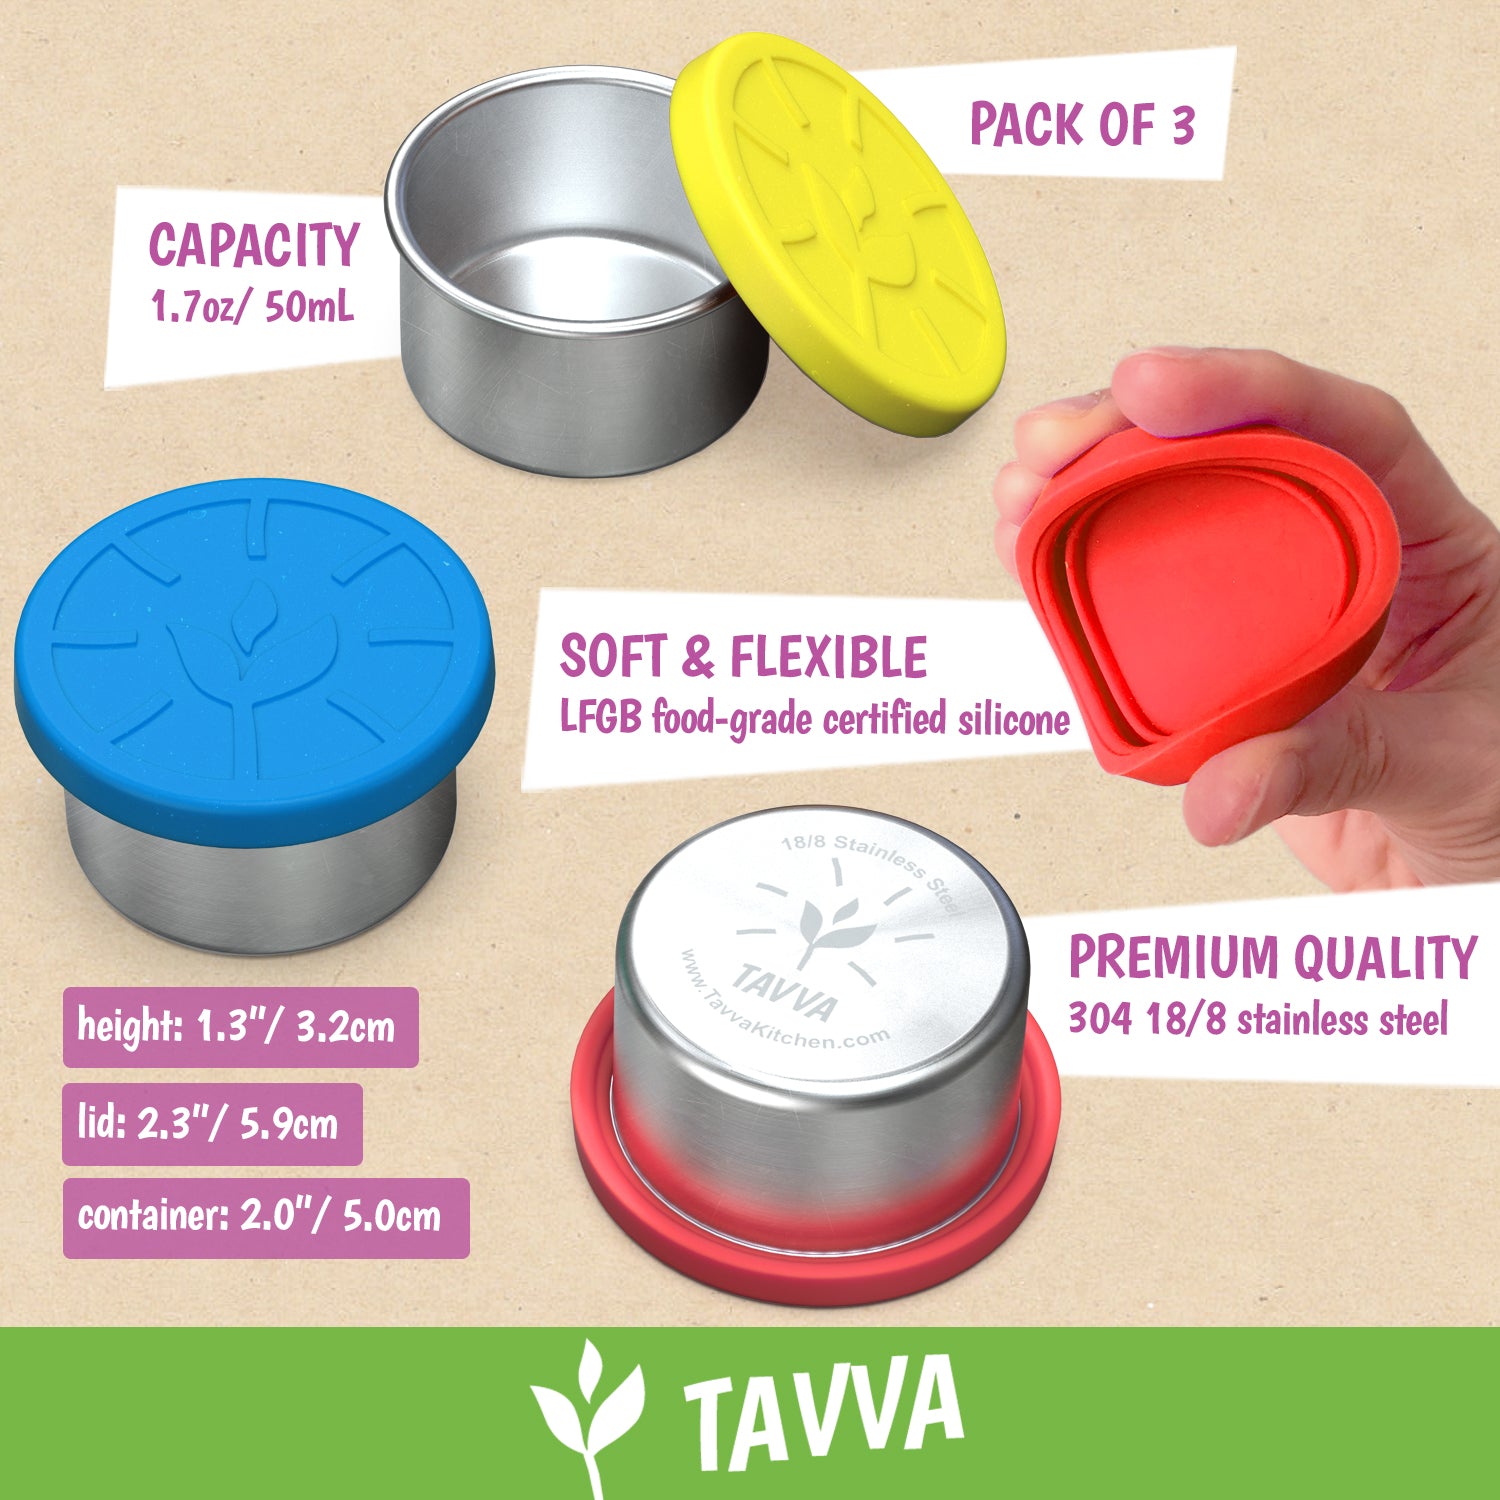 Tavva Snack Deluxe Stainless Steel Containers Set of 3